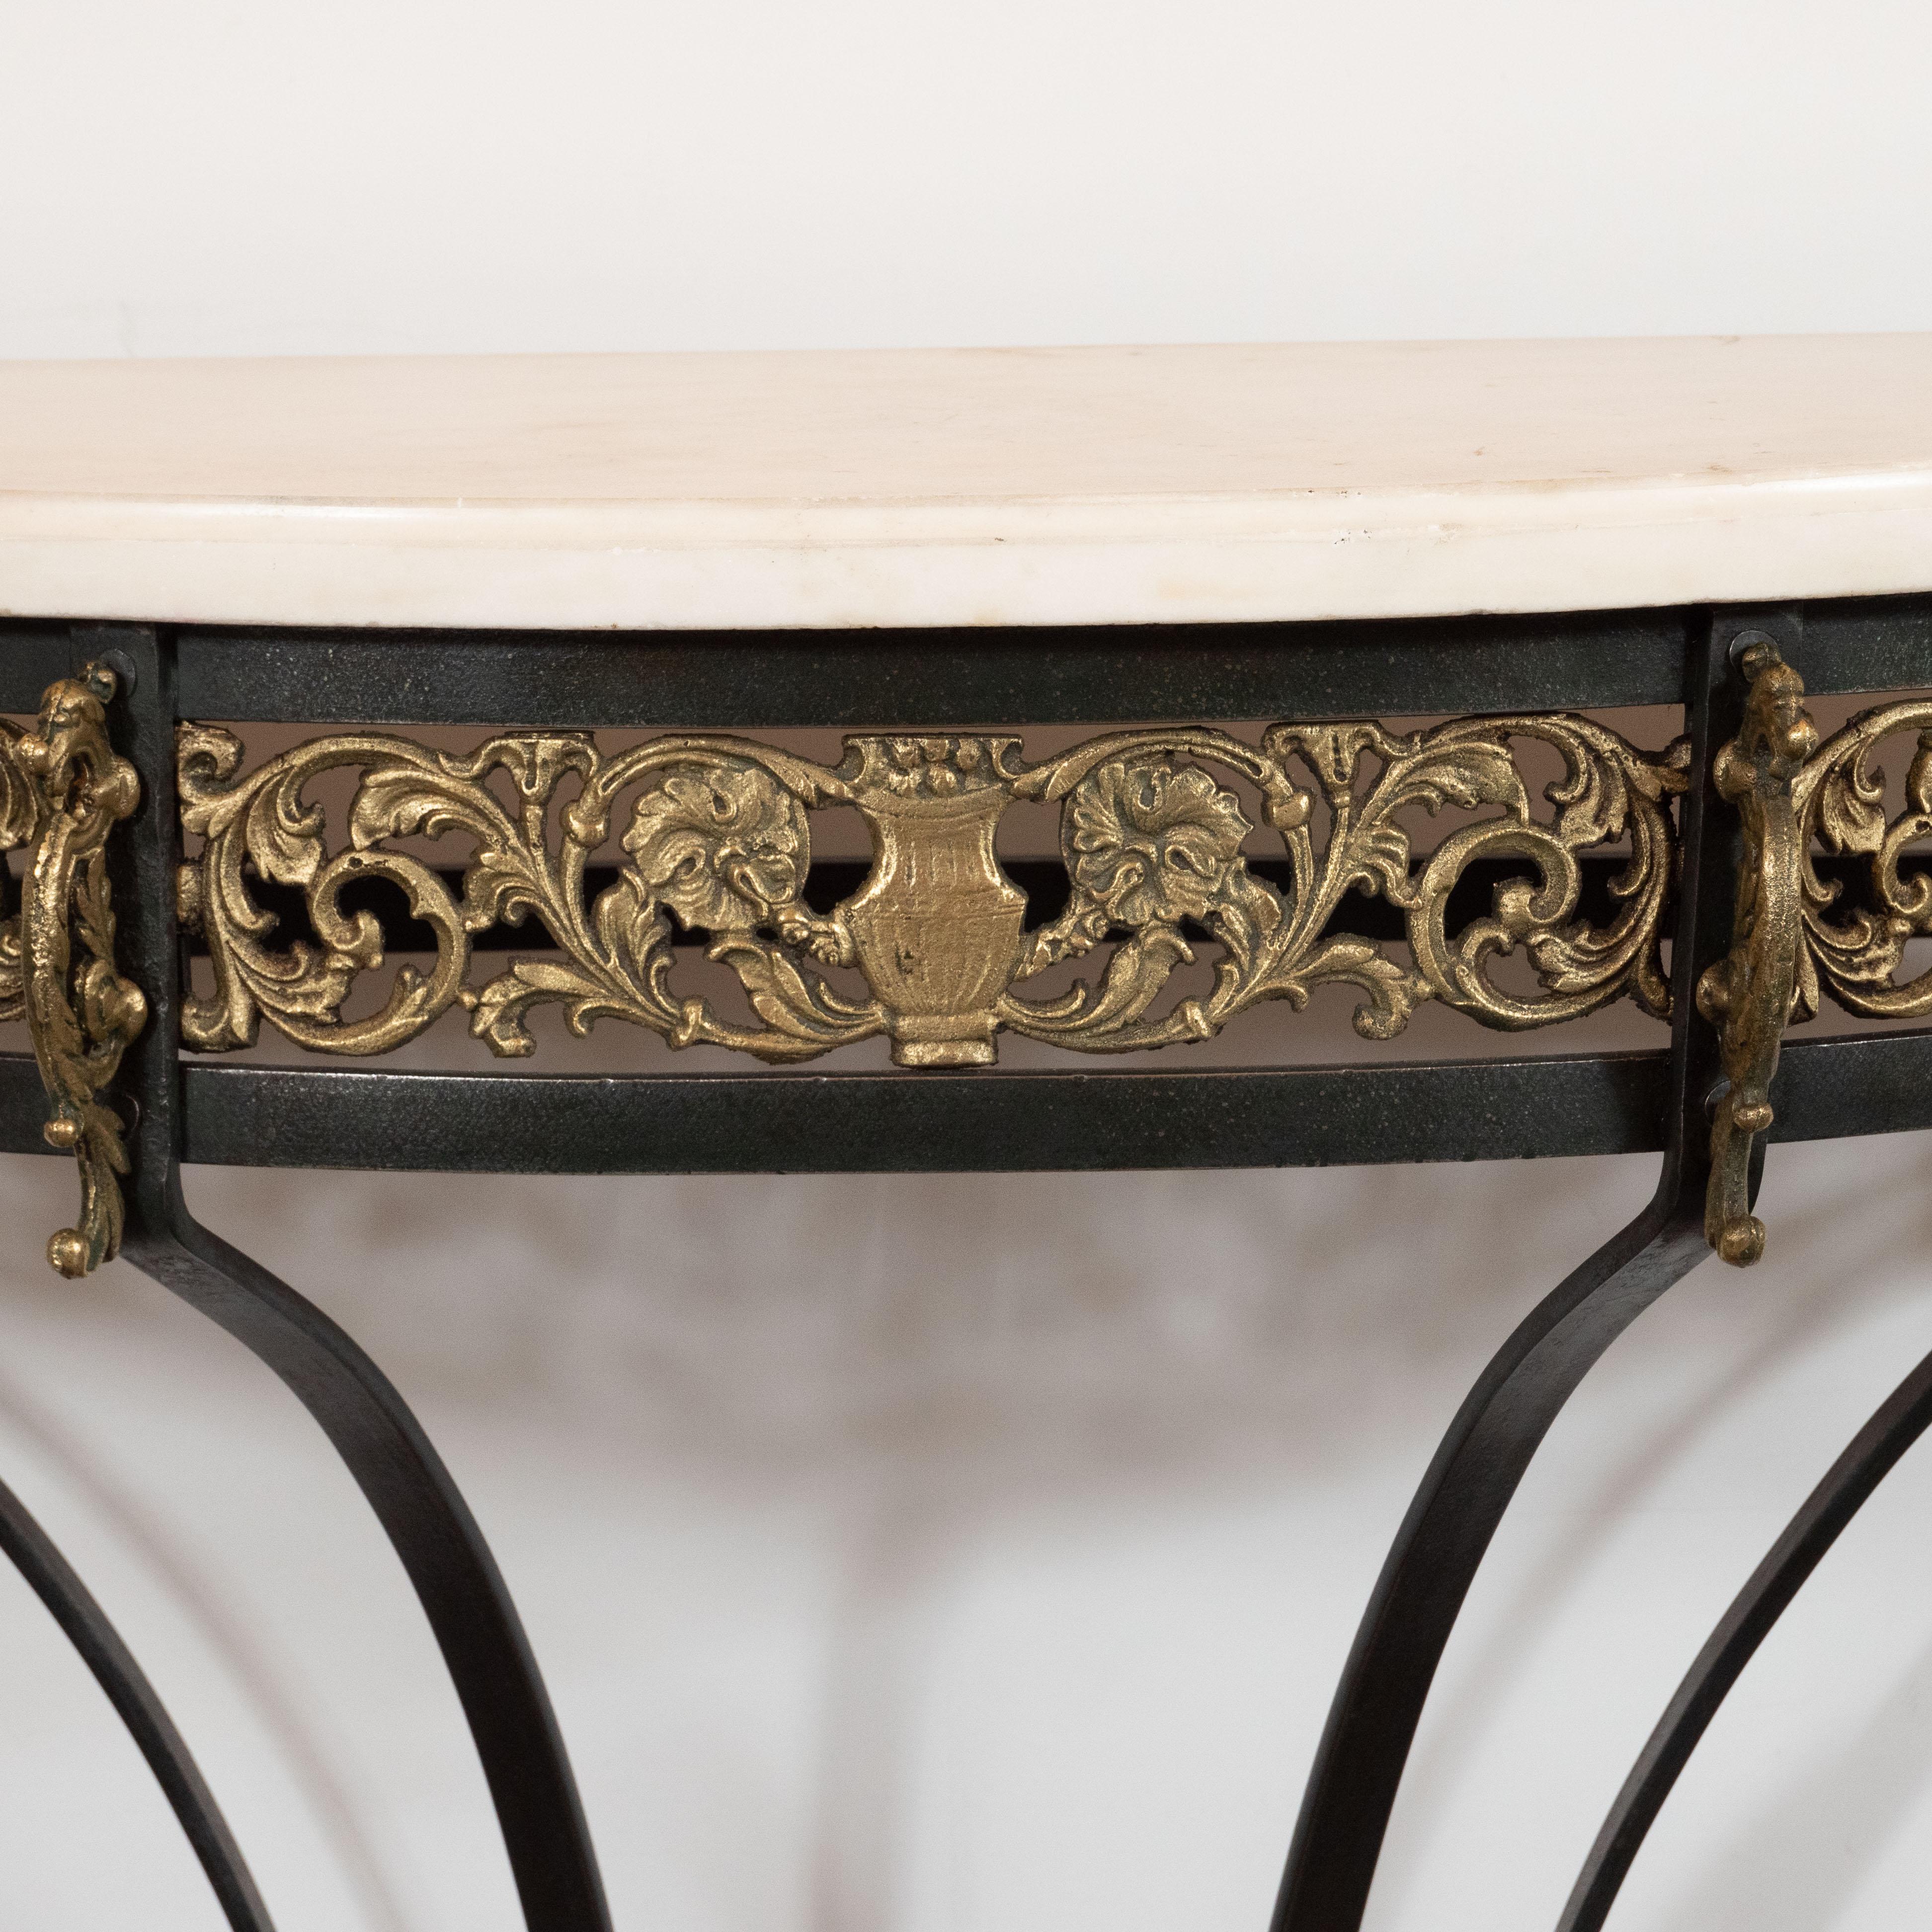 This sophisticated Art Deco console table was realized in the United States, circa 1935. Realized in the manner of Edgar Brandt, it features a demilune form Carrara marble top with a subtle grisaille palette and variegated grain. It is supported by